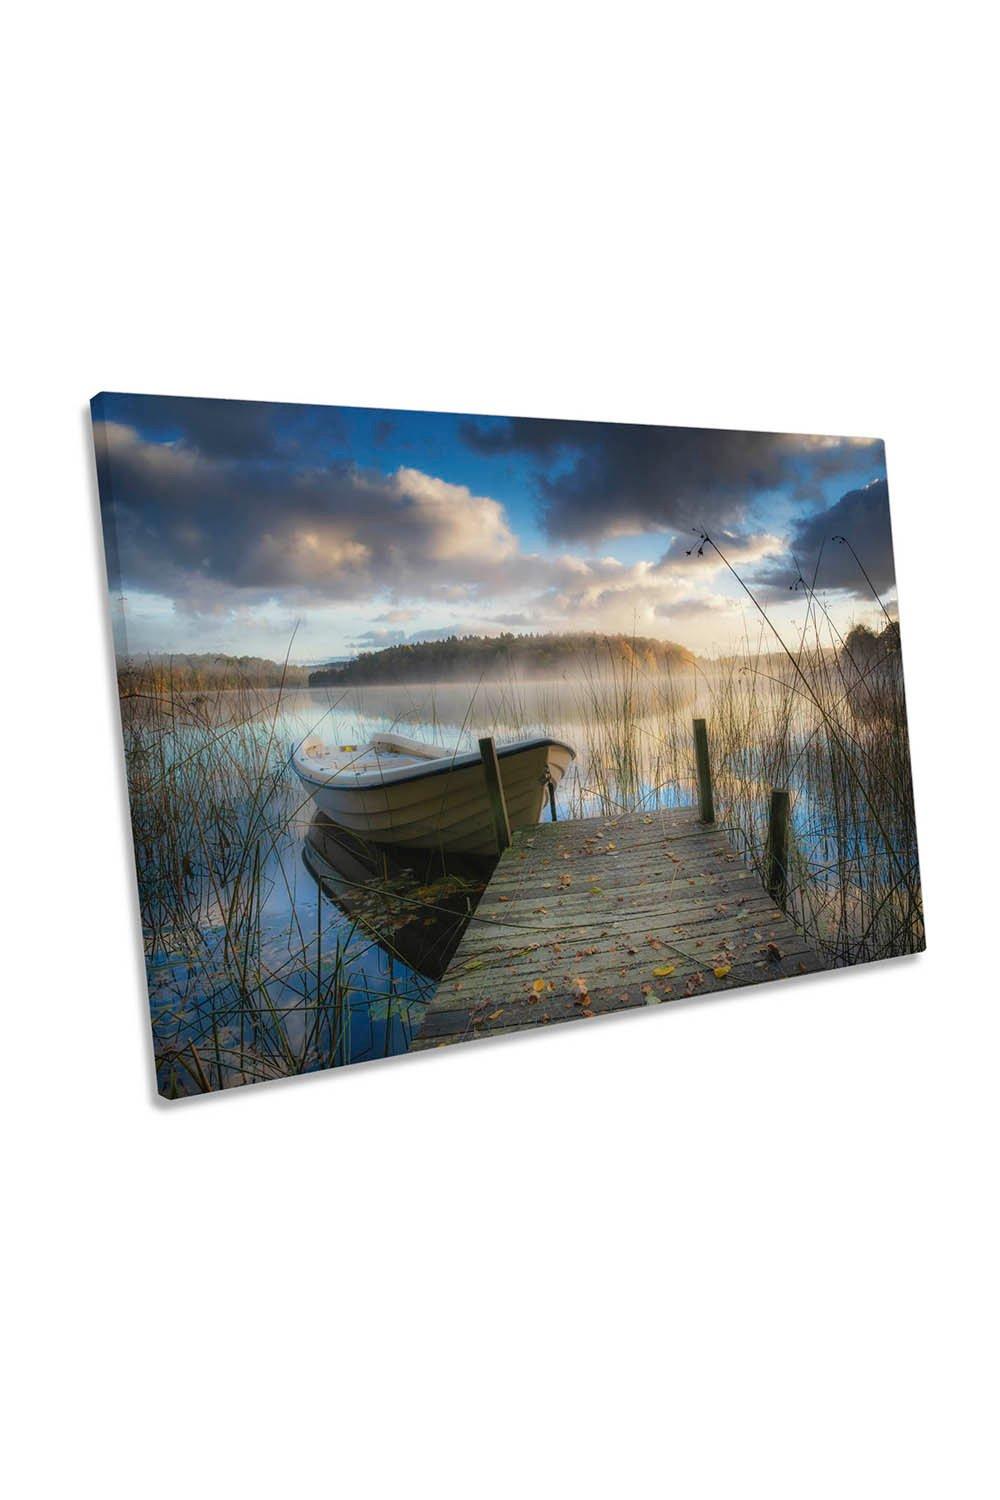 Misty Morning at the Lake Boat Peaceful Canvas Wall Art Picture Print